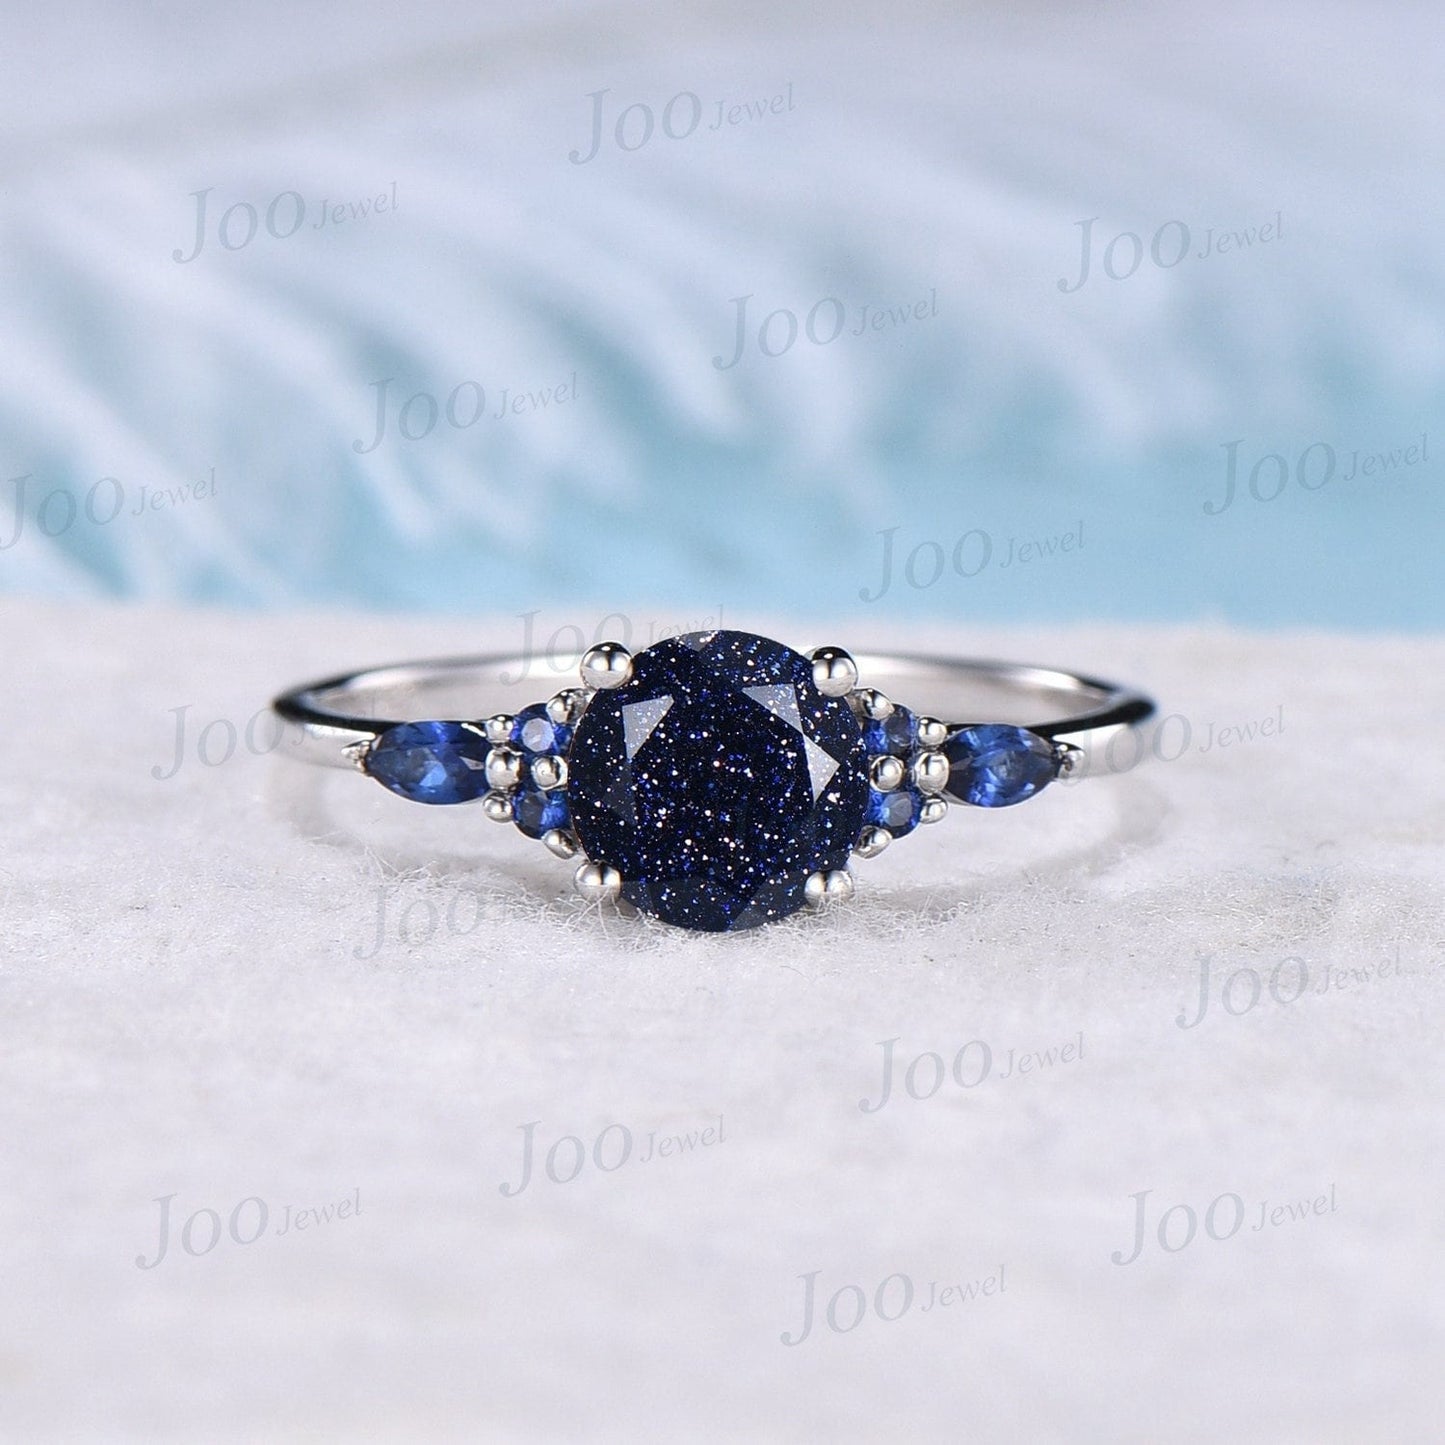 7mm Round Cut Galaxy Blue Sandstone Ring 10K Rose Gold Blue Gemstone Jewelry Vintage Blue Sapphire Wedding Ring Unique Birthday Gift for Her